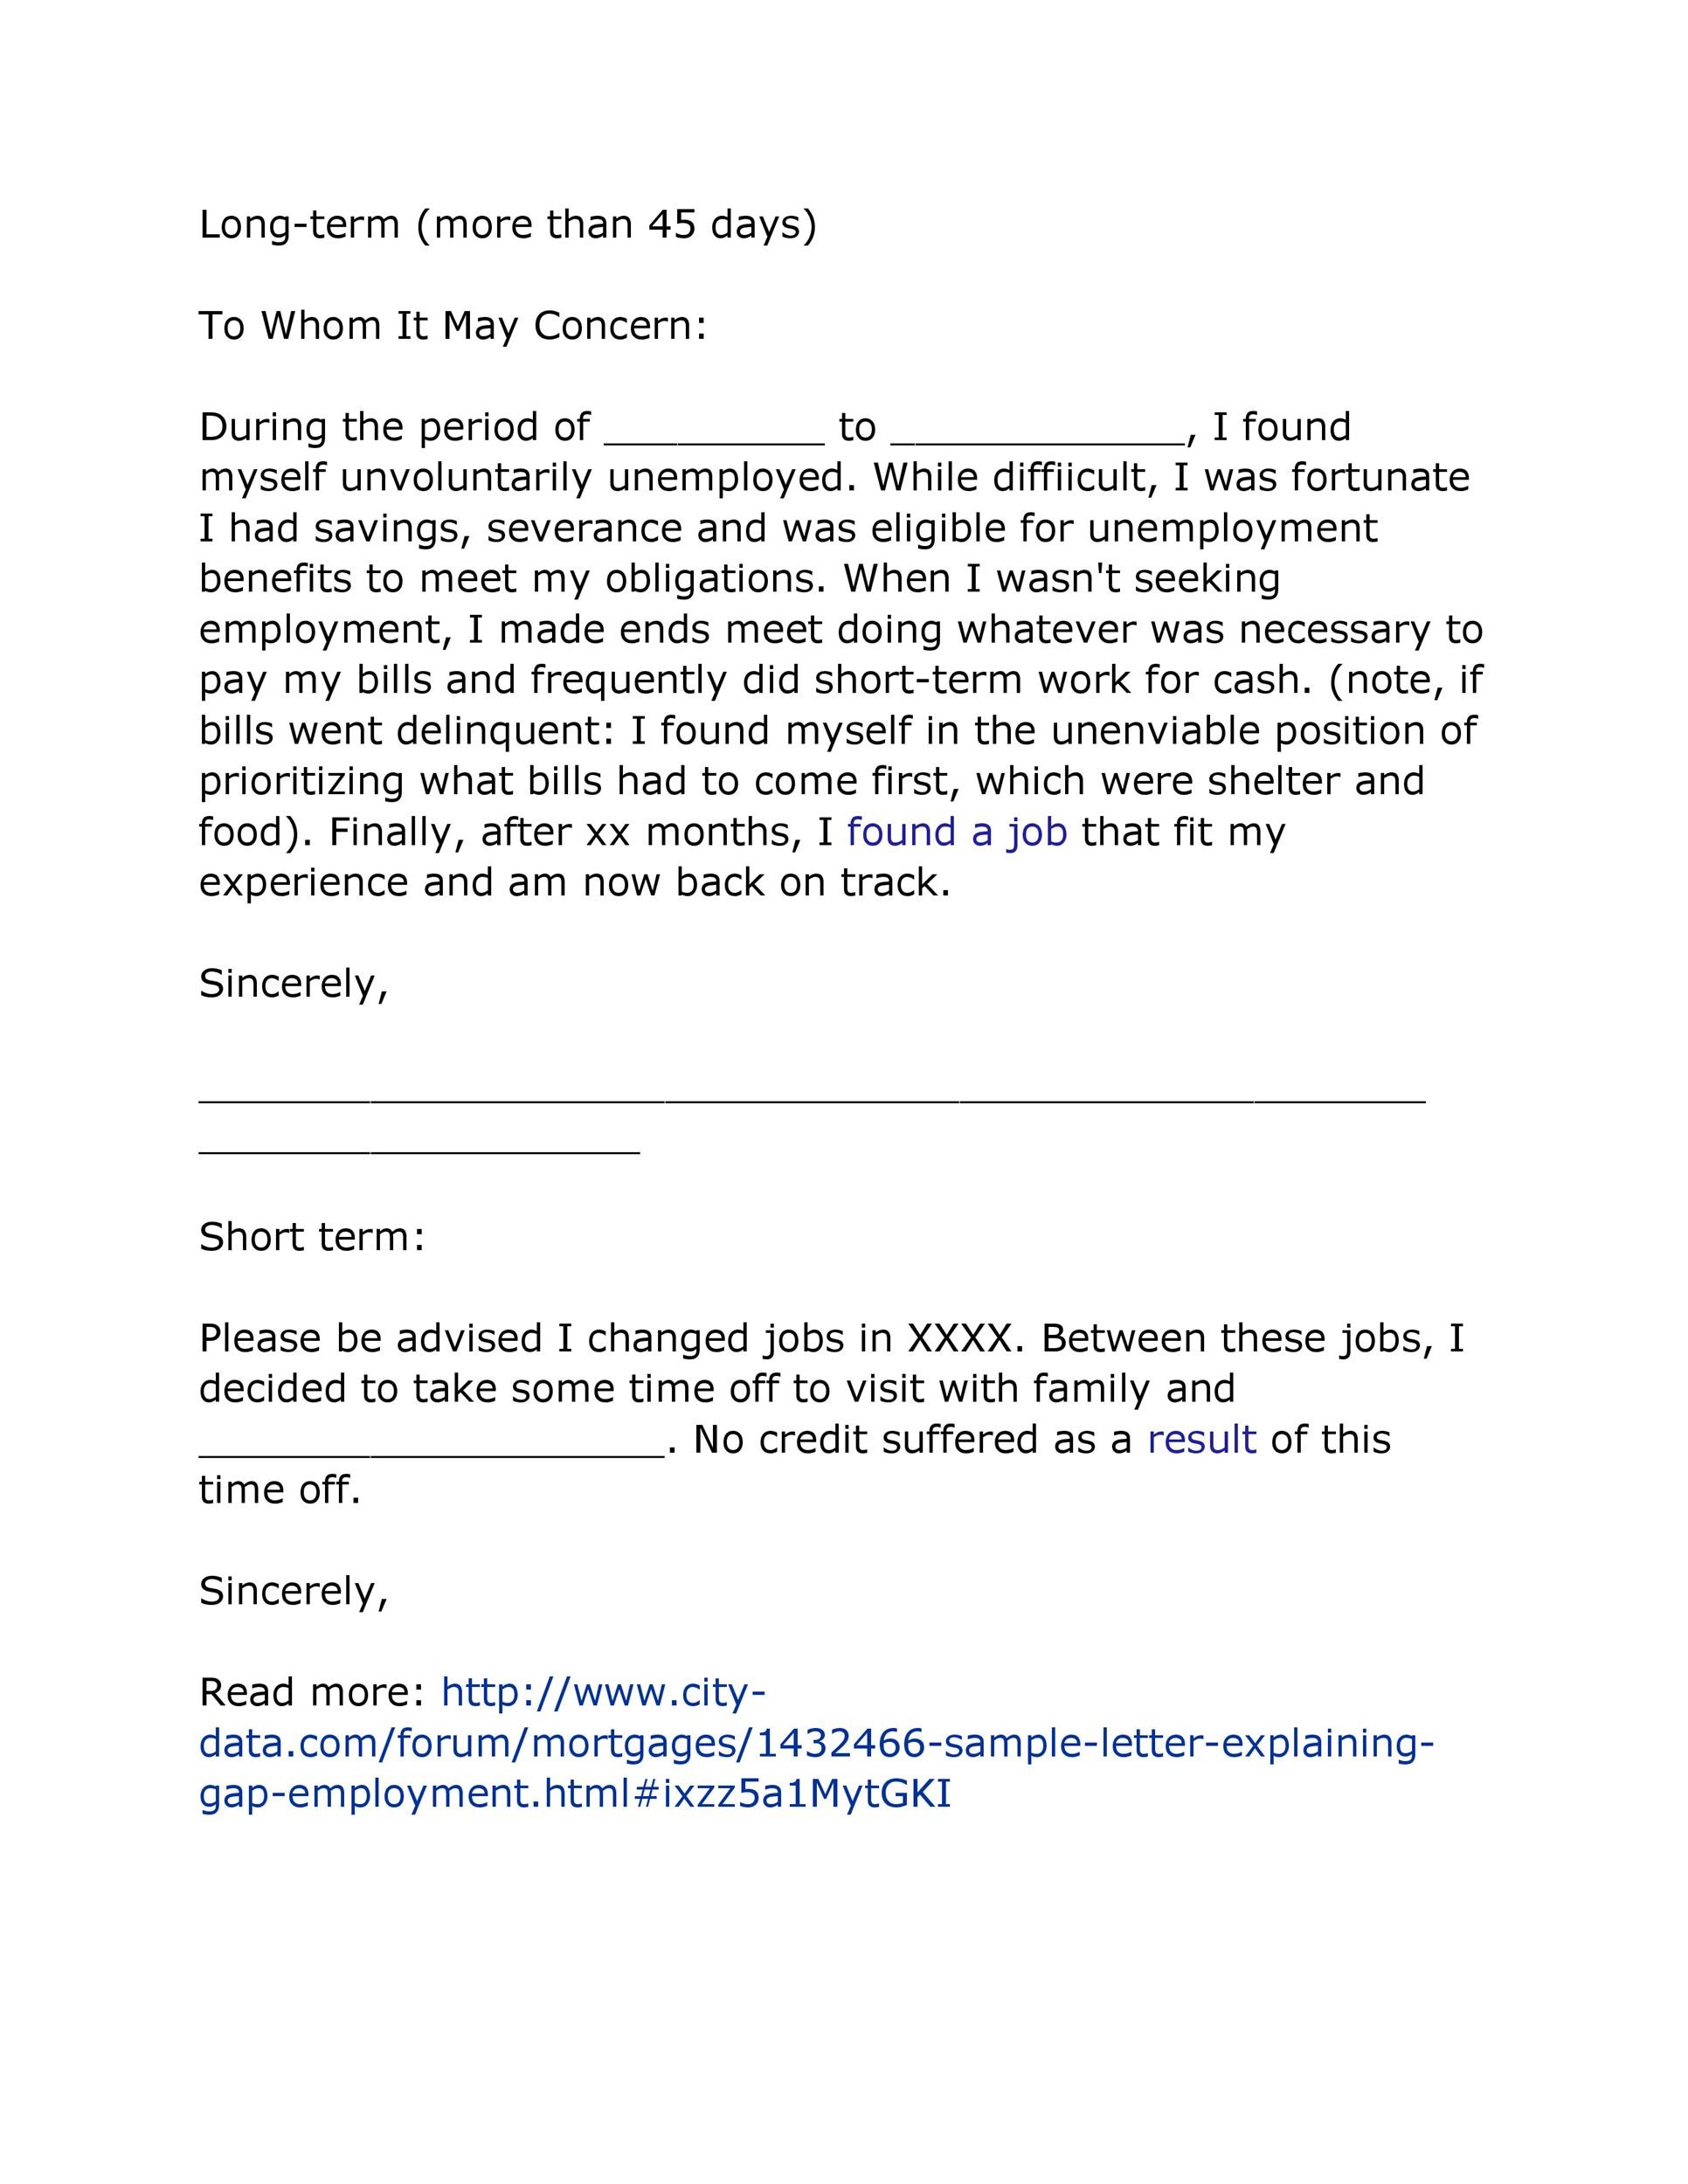 Sample Letter Explaining Bad Credit To Employer from templatelab.com